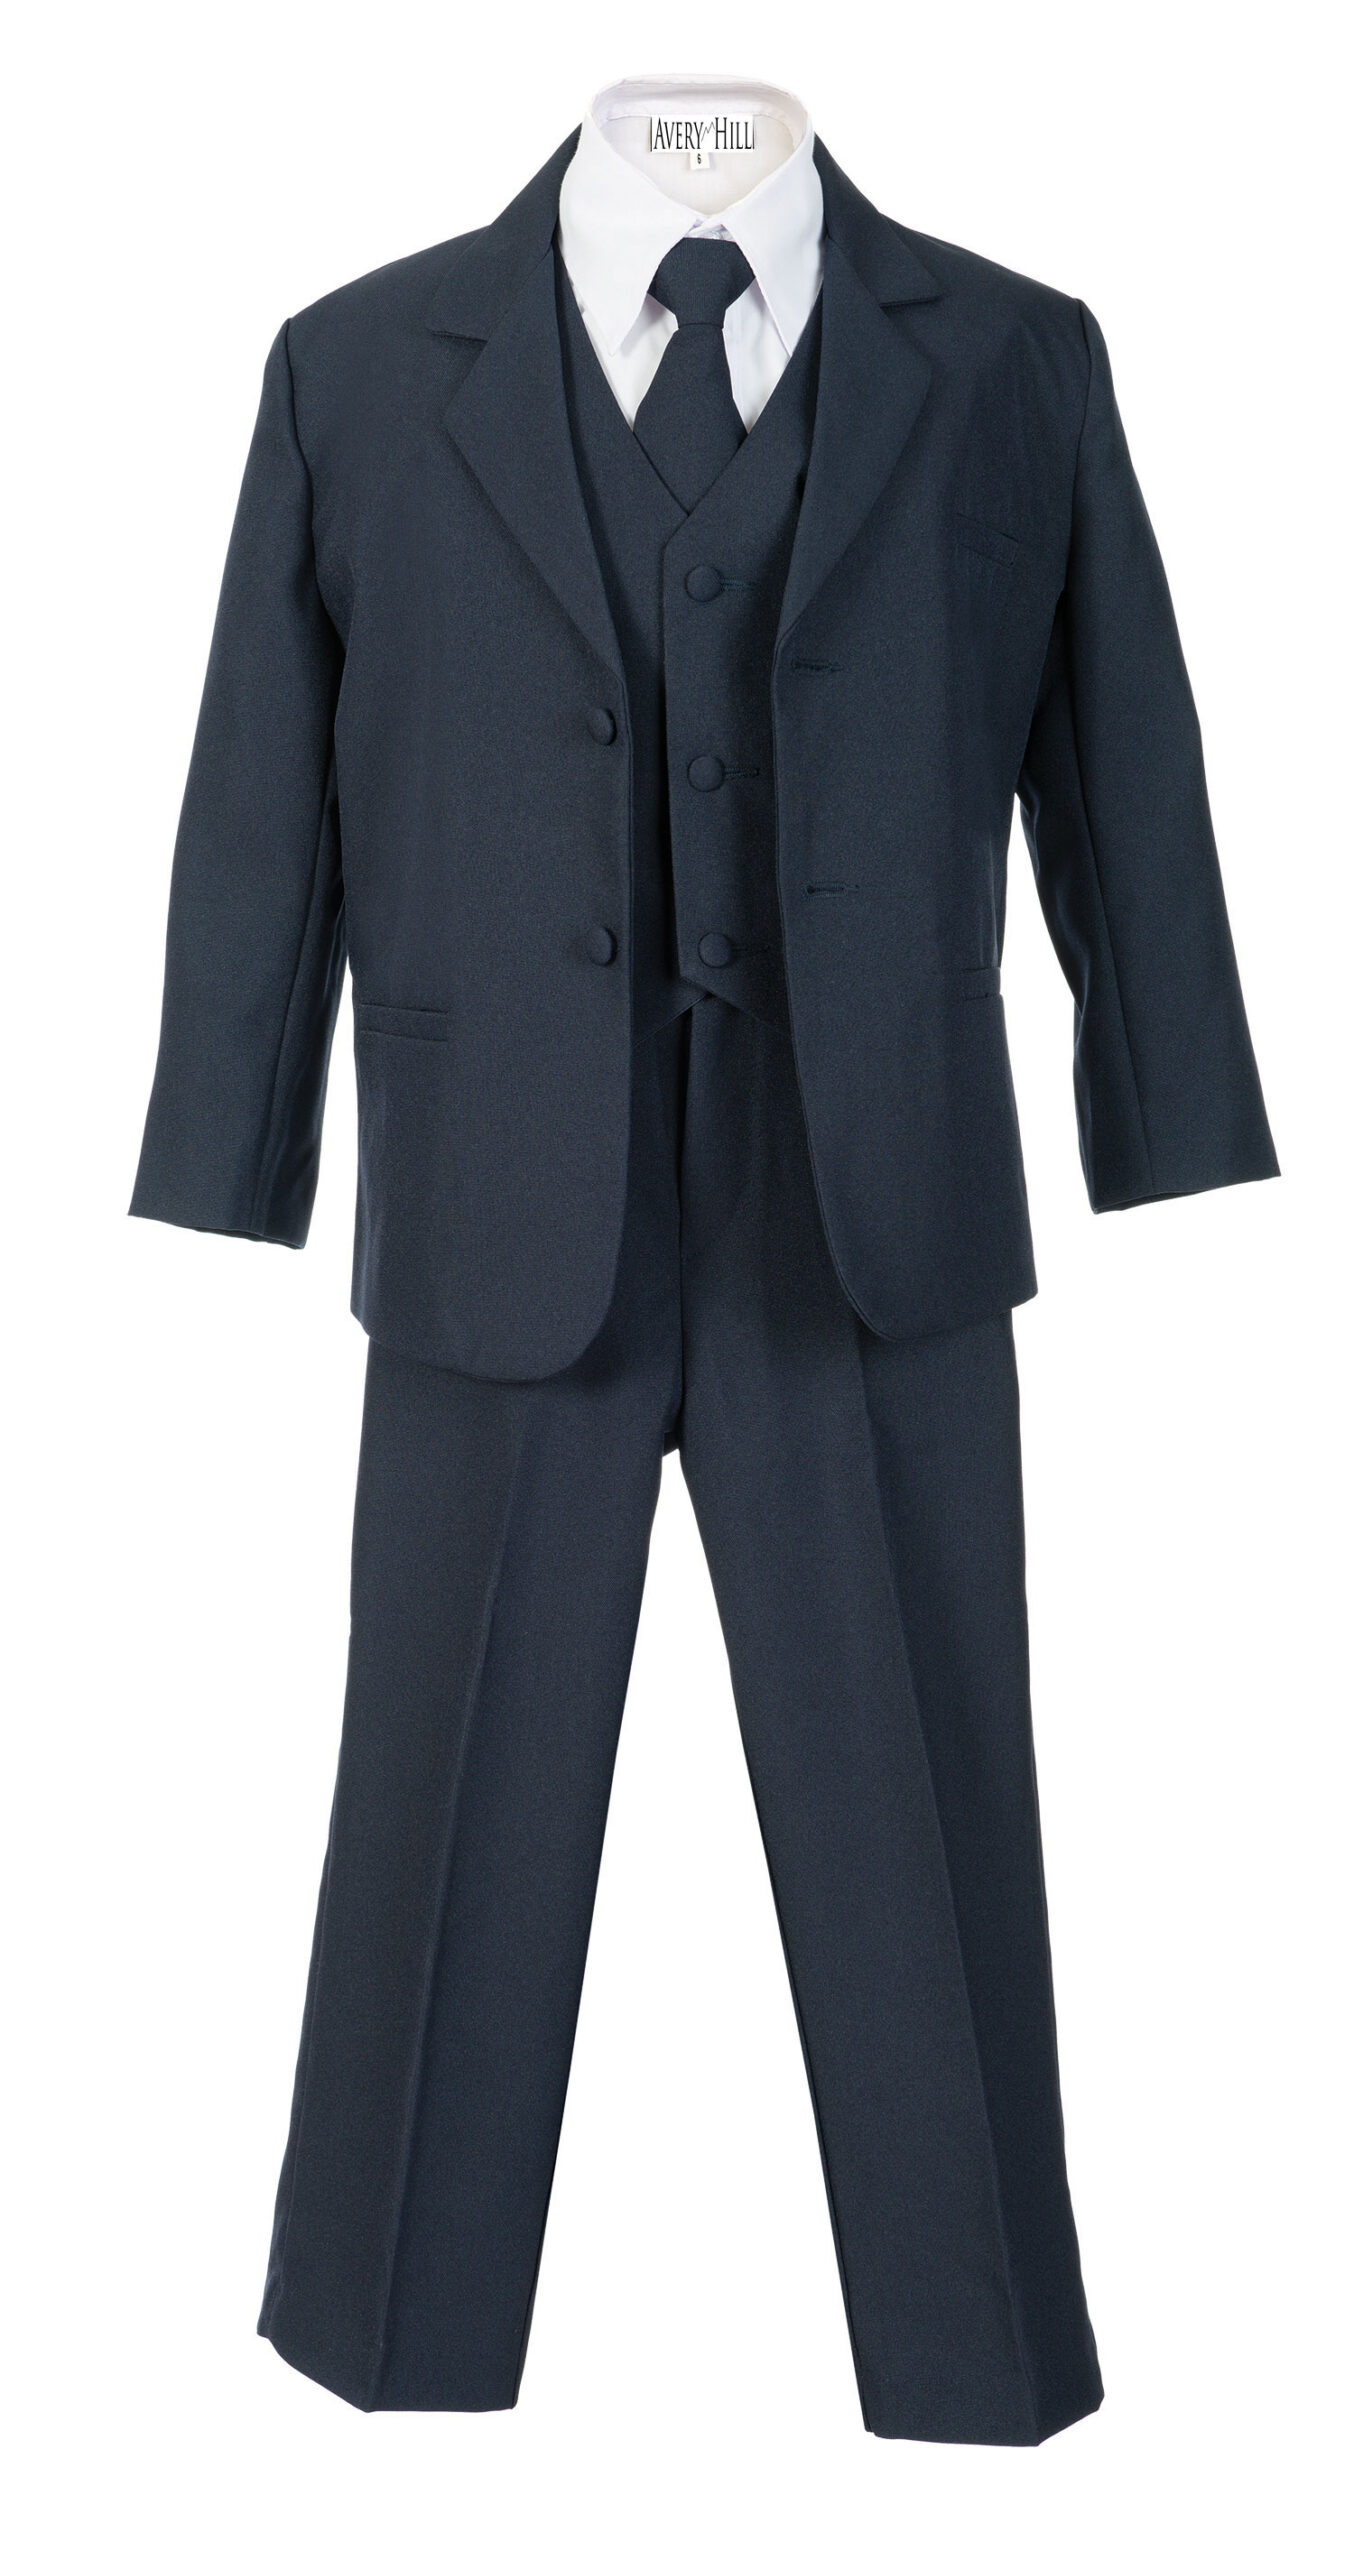 Avery Hill Boys Formal 5 Piece Suit with Shirt and Vest Navy - 20